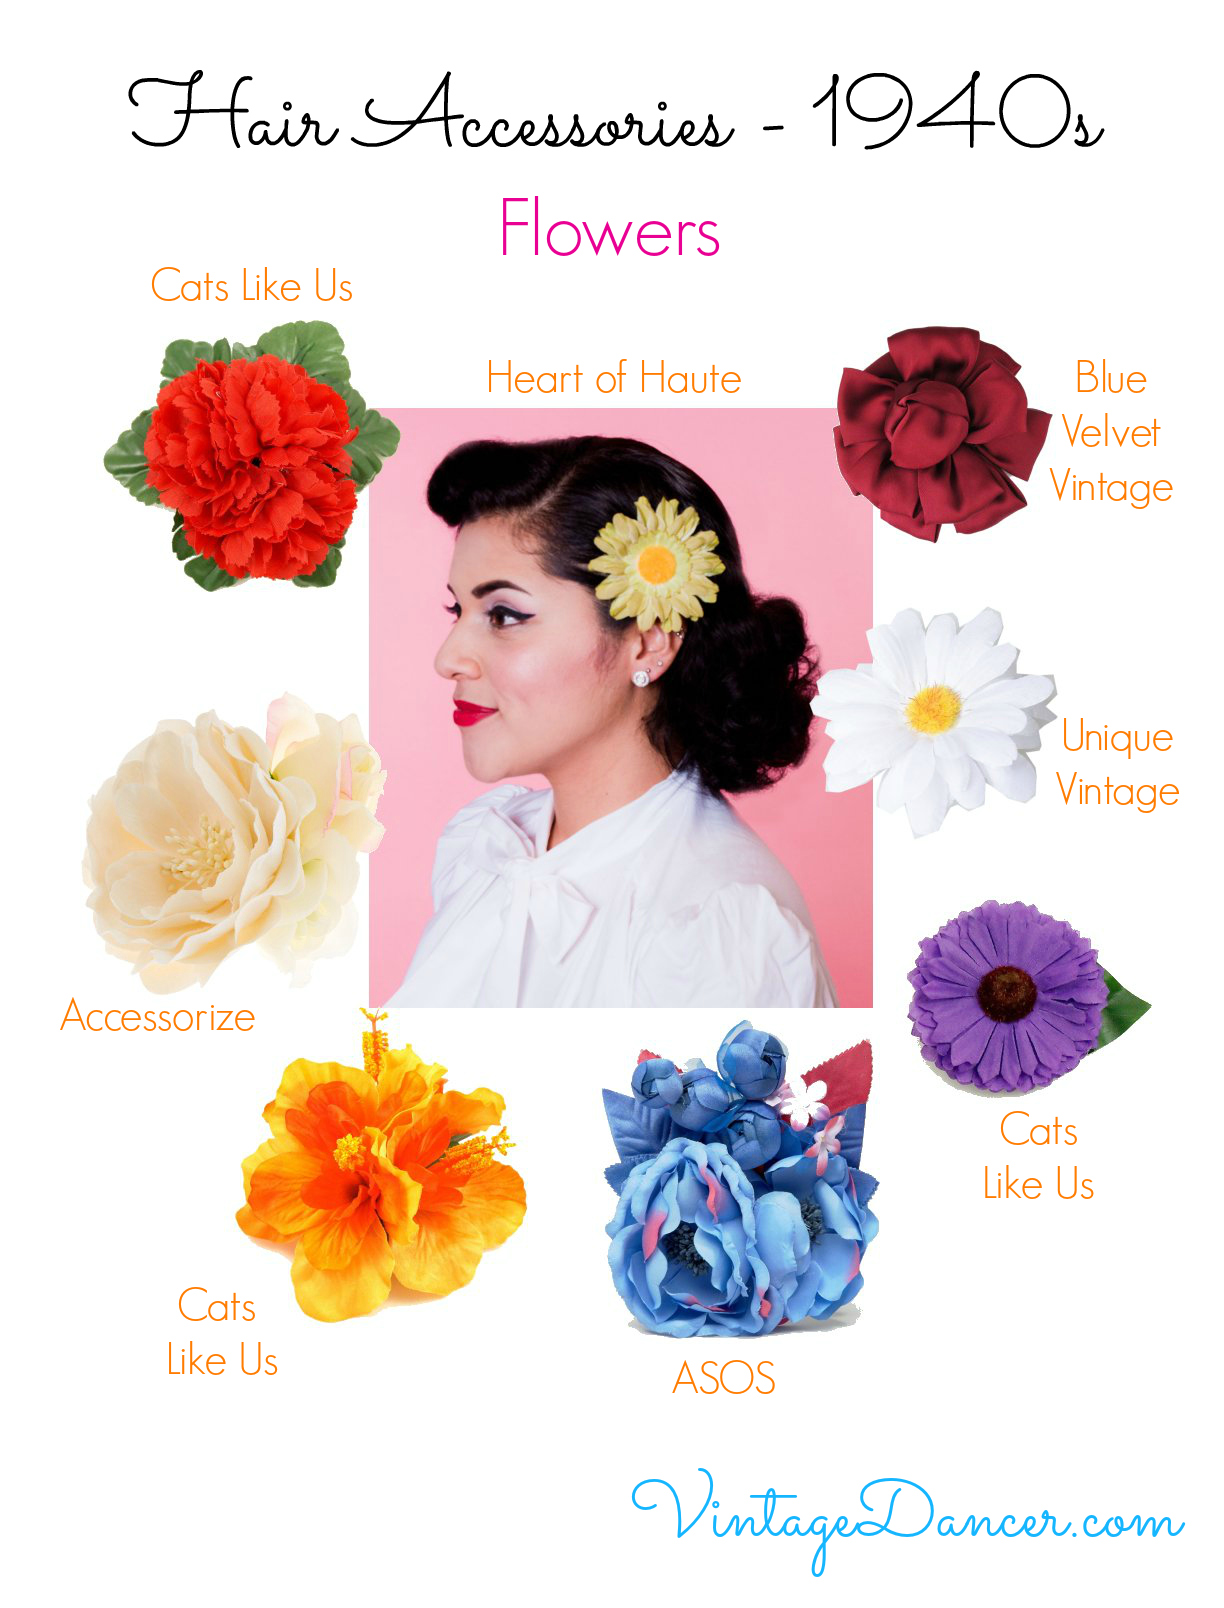 1940s Vintage Hair Accessories – 4 Authentic Styles